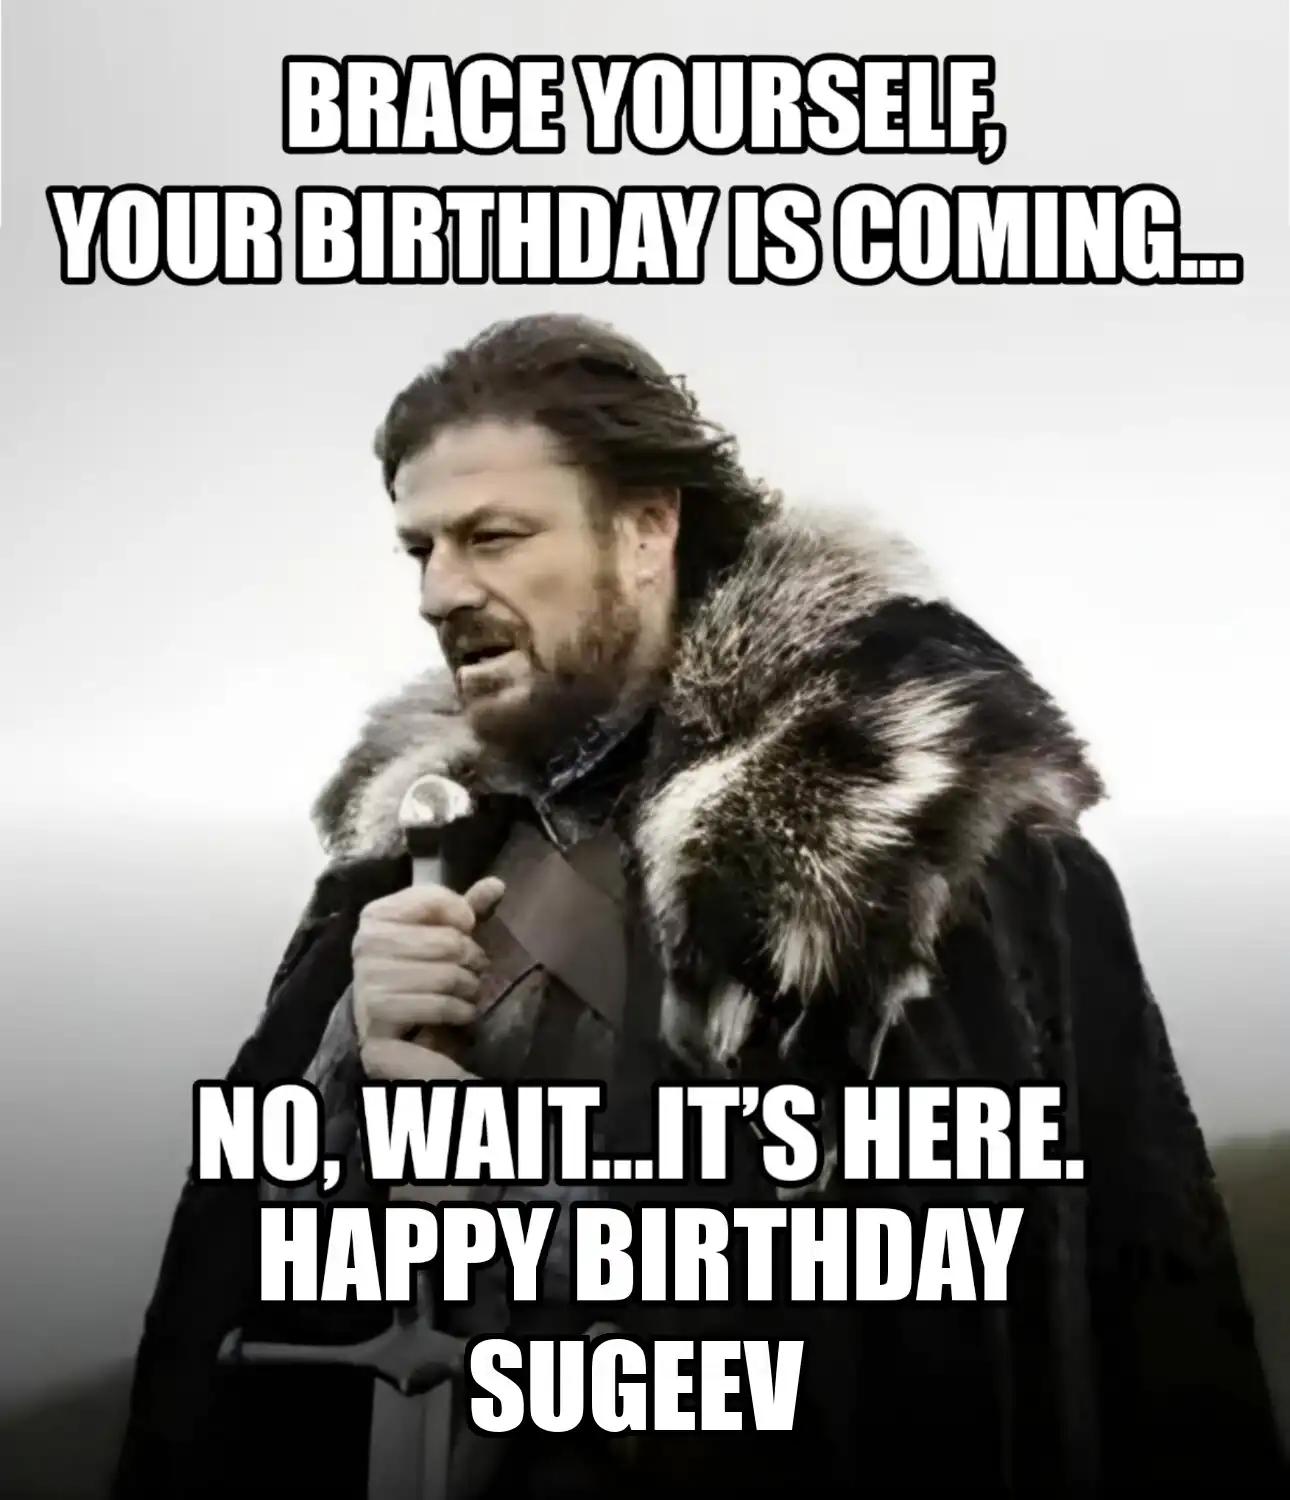 Happy Birthday Sugeev Brace Yourself Your Birthday Is Coming Meme